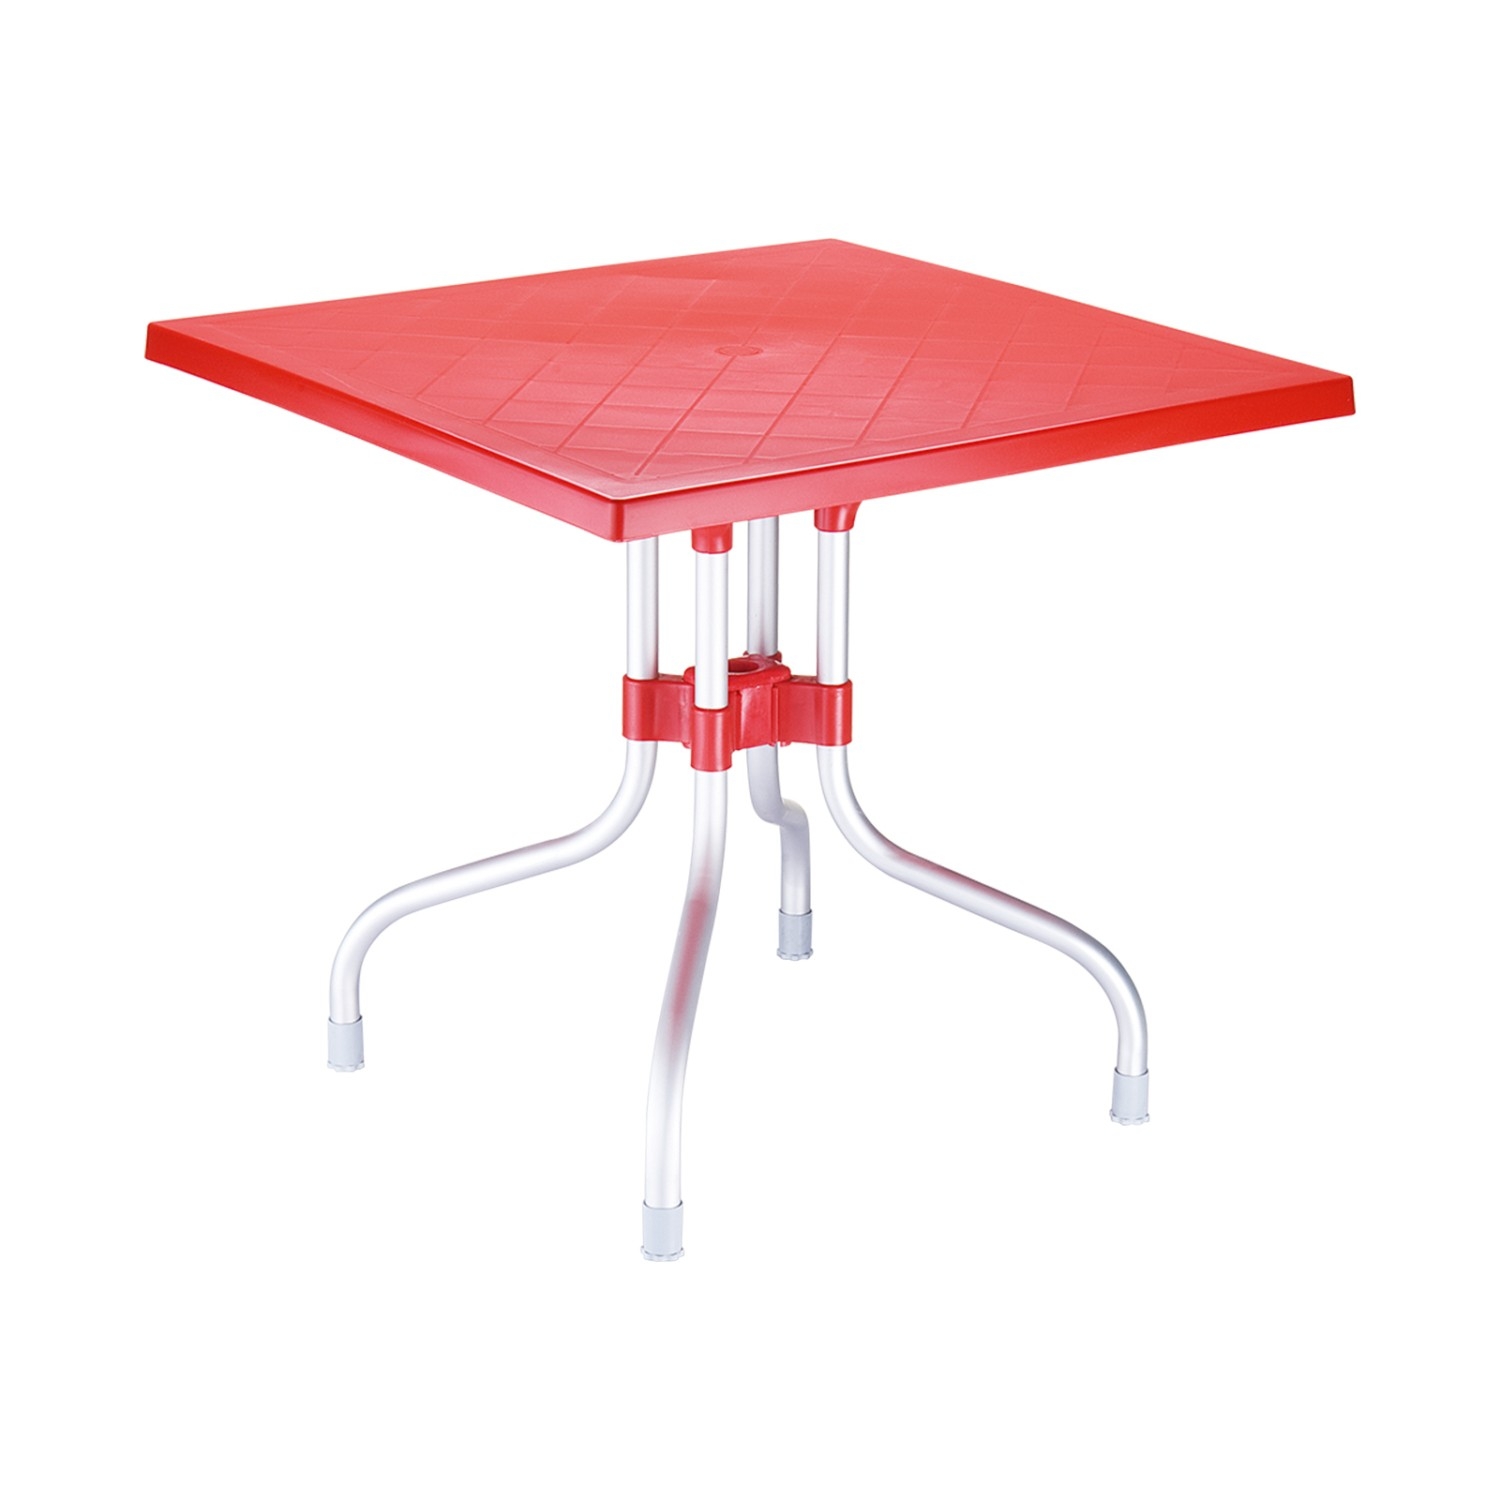 Forza Square Folding Table 31 Inch (Red) (28"H x 31"W x 31"D)